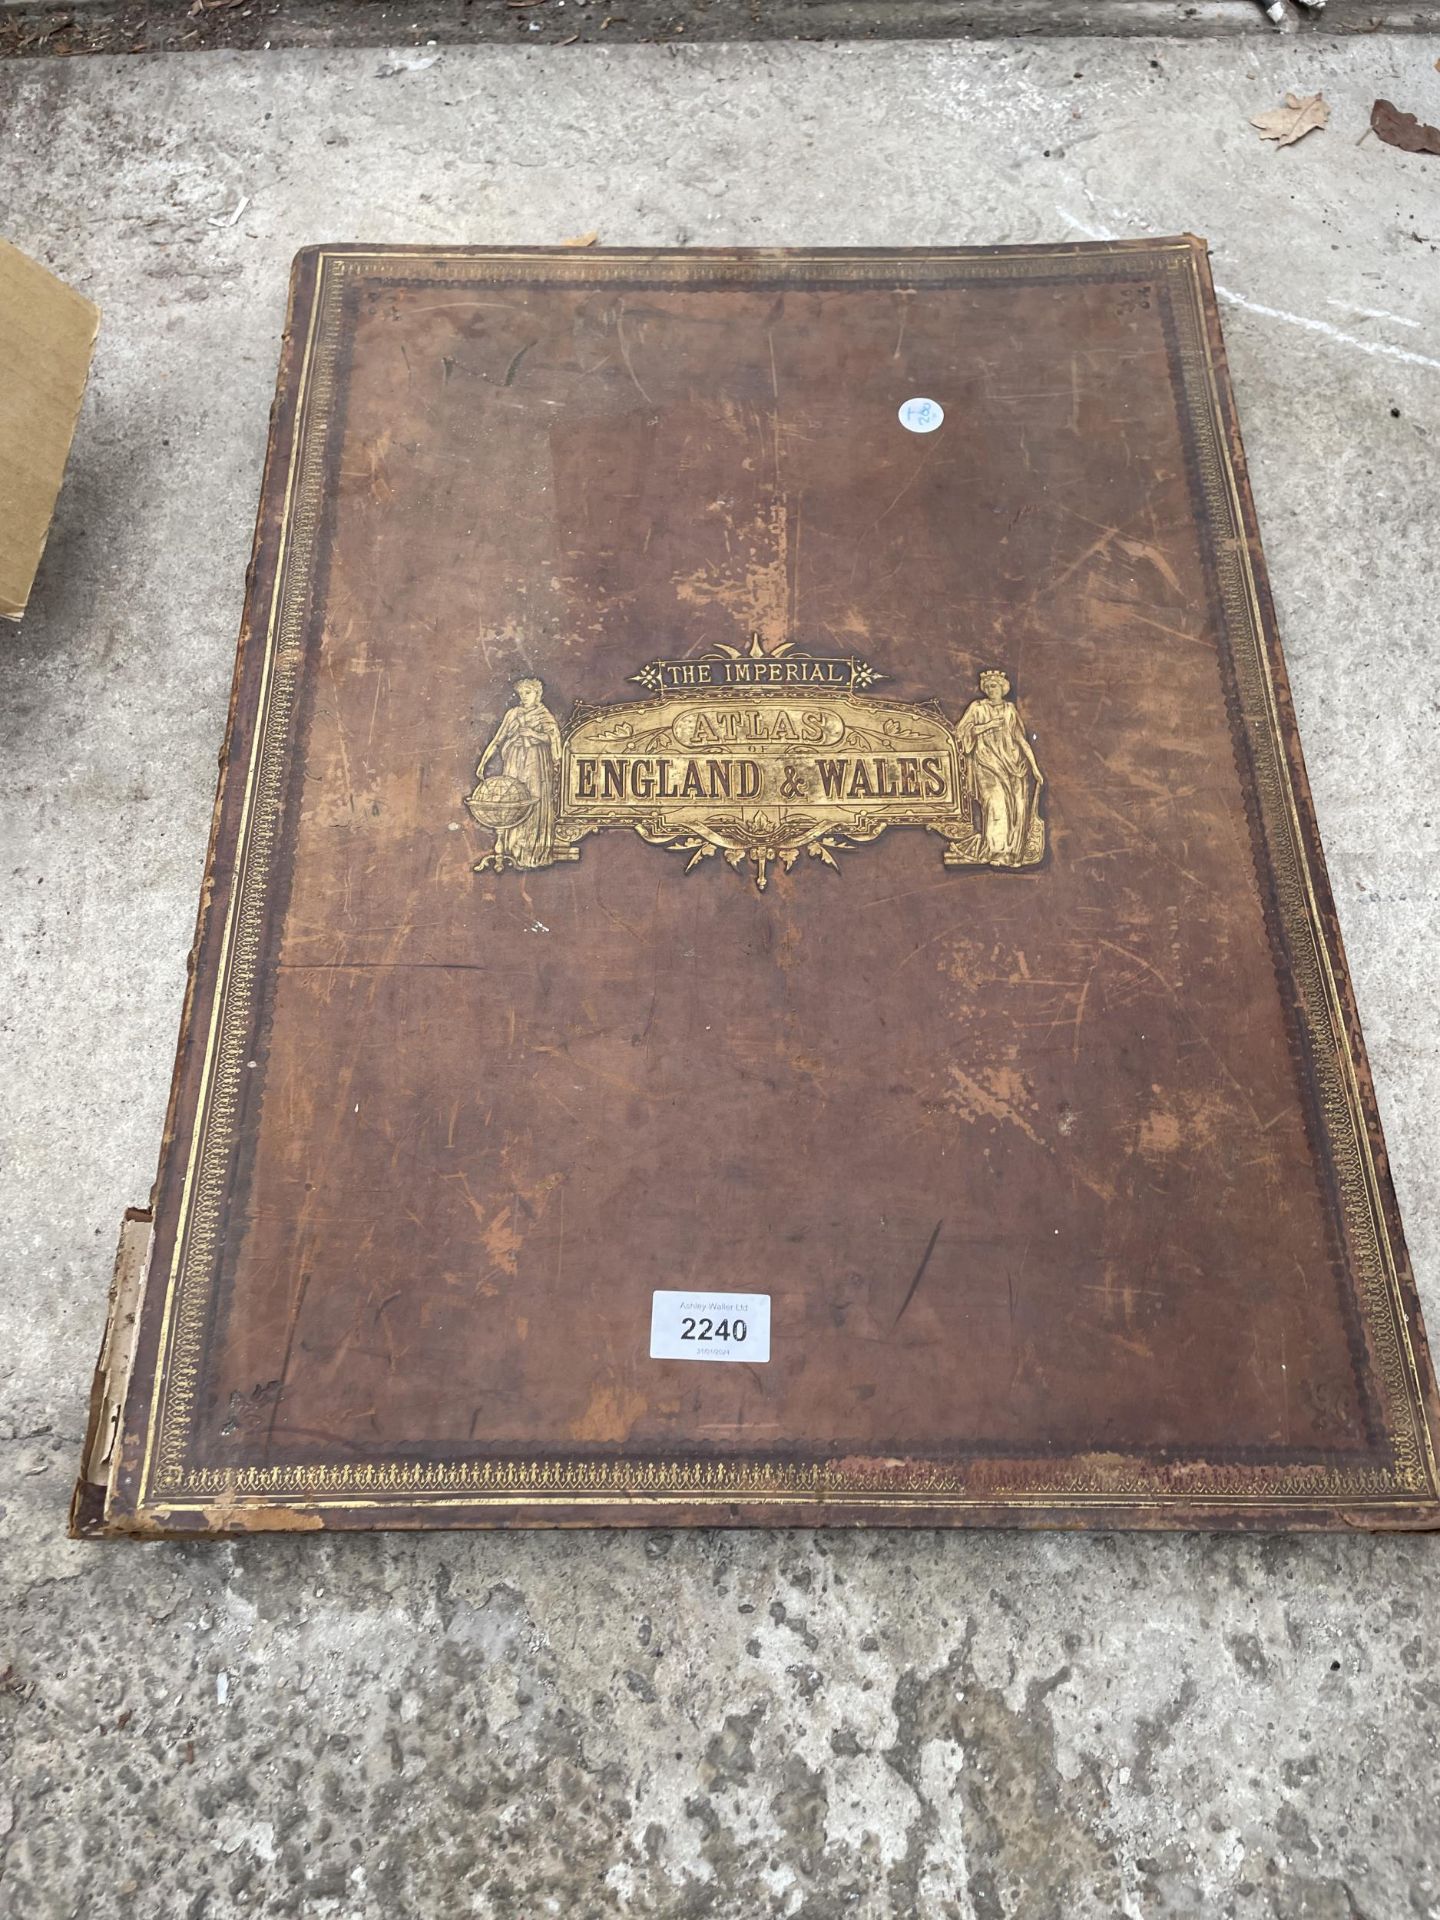 A VINTAGE LEATHER BOUND IMPERIAL ATLAS OF ENGLAND AND WALES